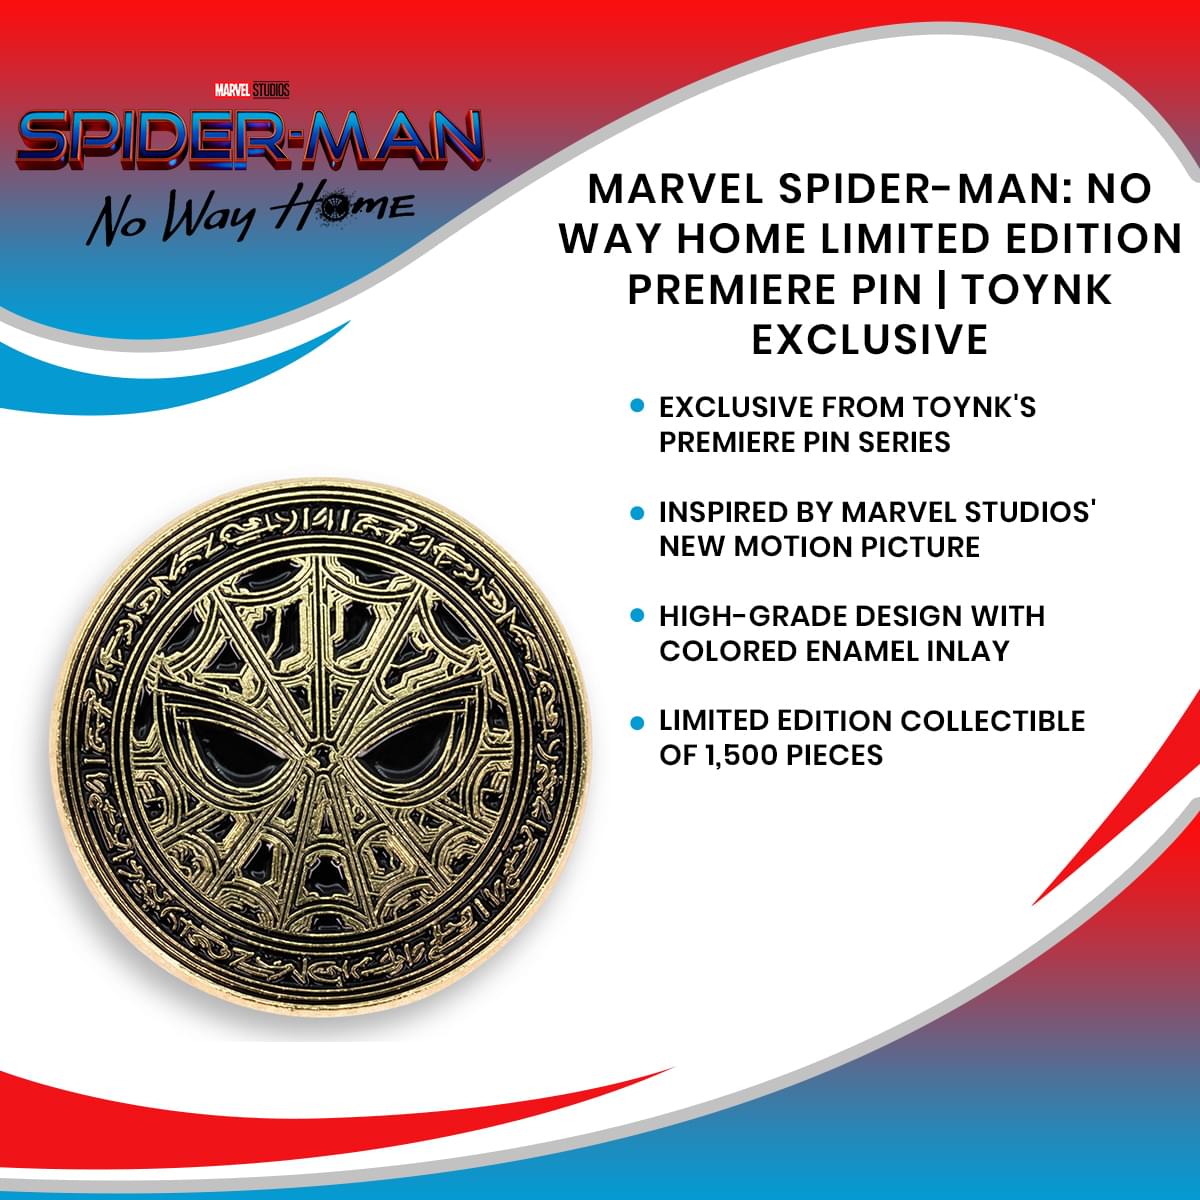 Marvel Spider-Man: No Way Home Limited Edition Premiere Pin | Toynk Exclusive